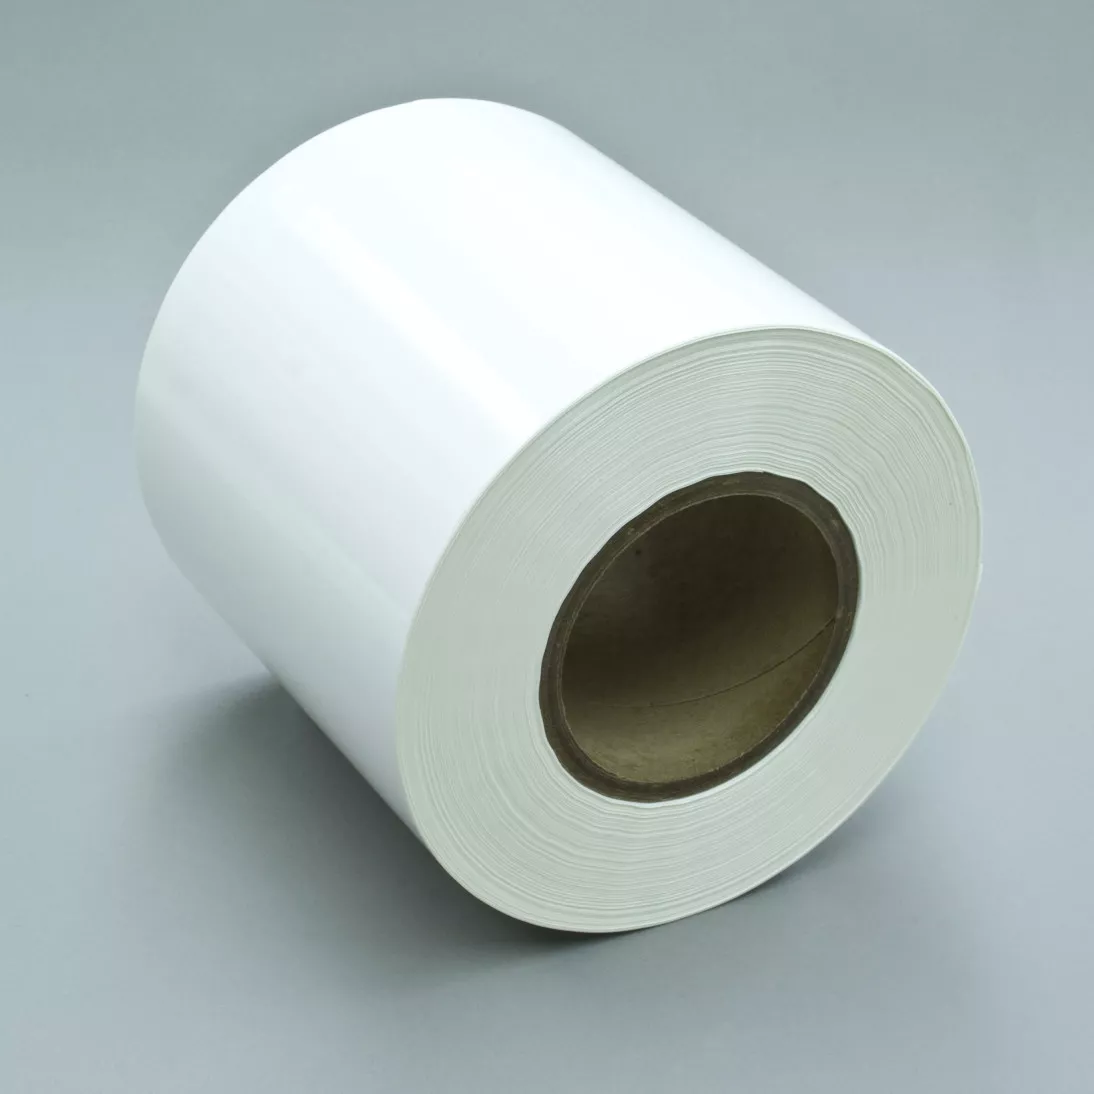 3M™ Press Printable Label Material 7871, White Polyester Gloss, 6 in x
1668 ft, 1 roll per case